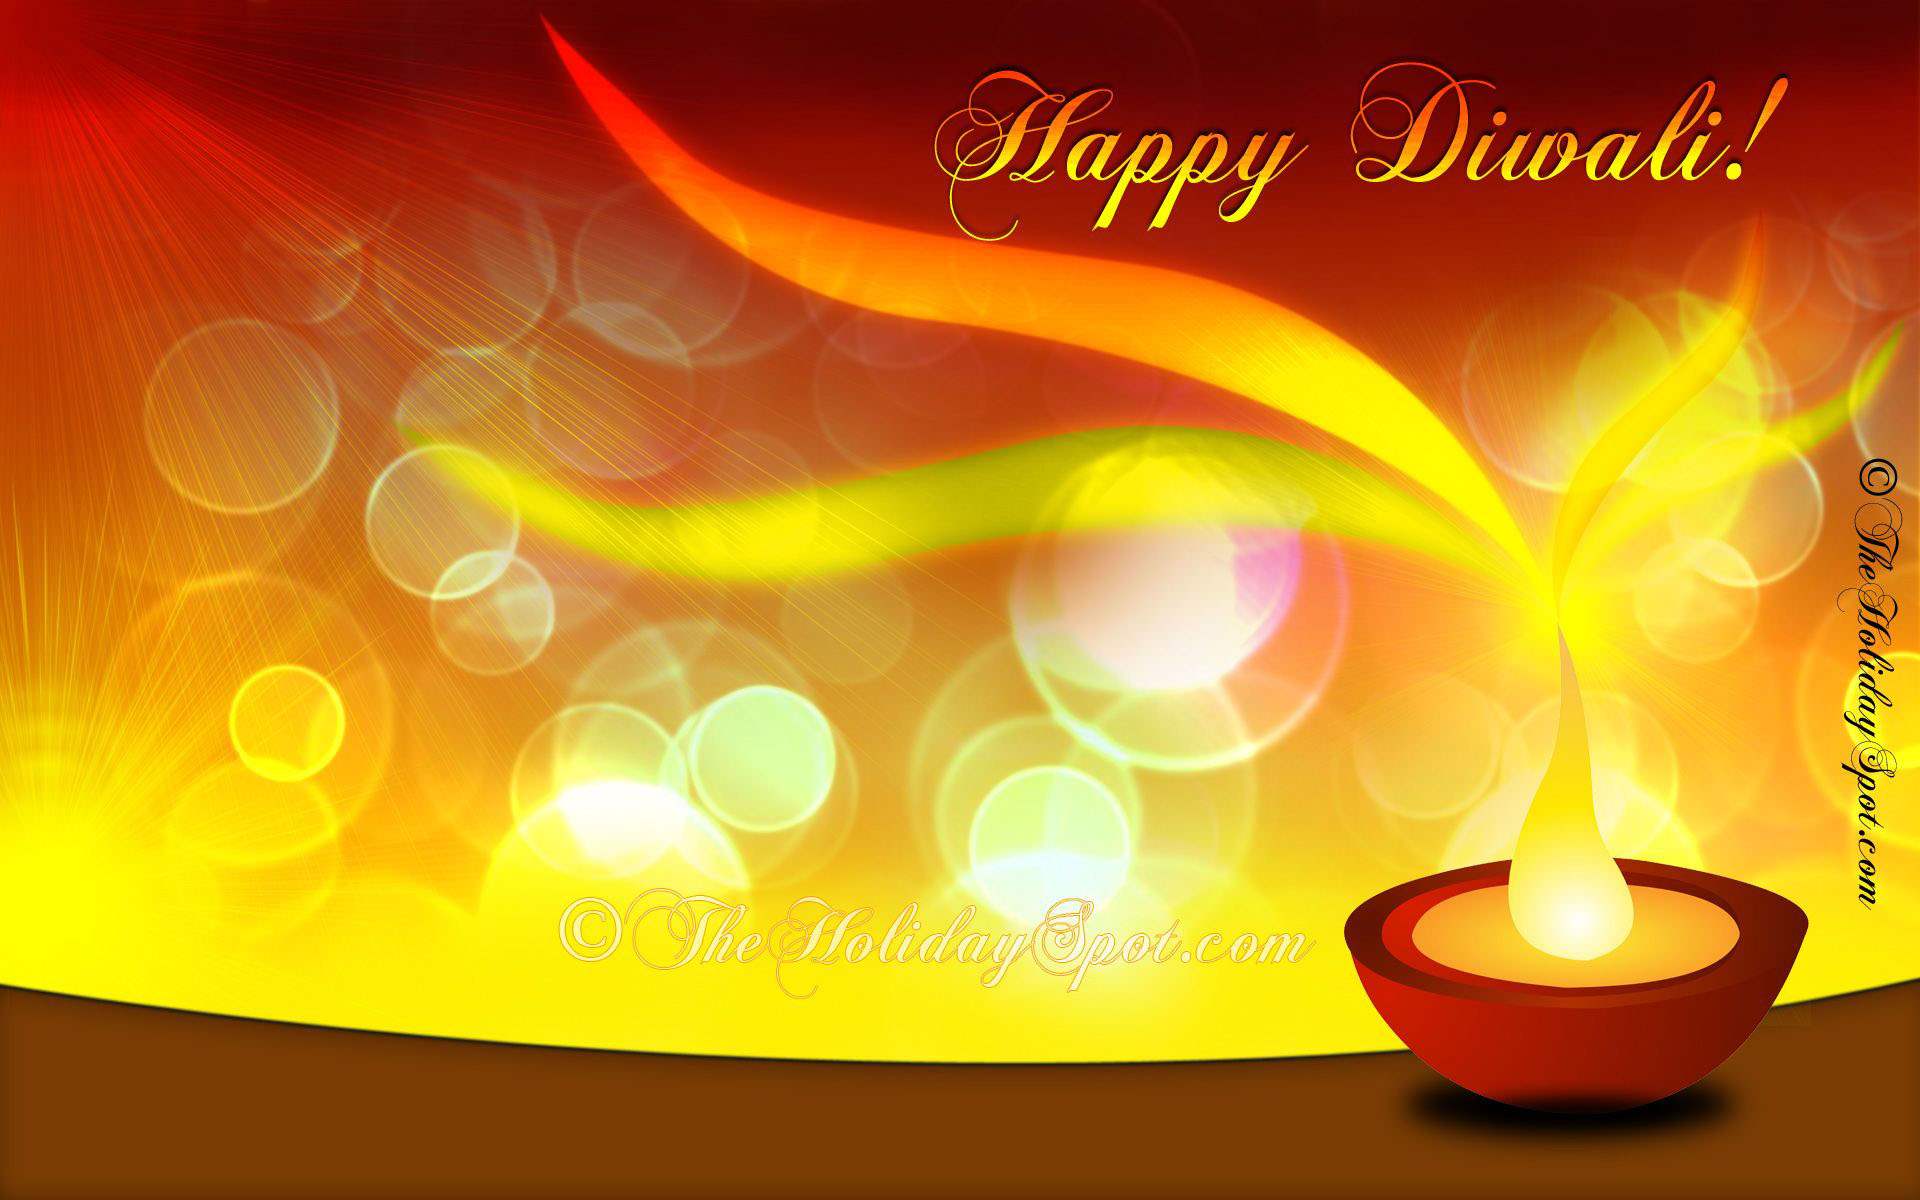 Full HD Diwali Wallpapers and Greeting Cards - Page 2